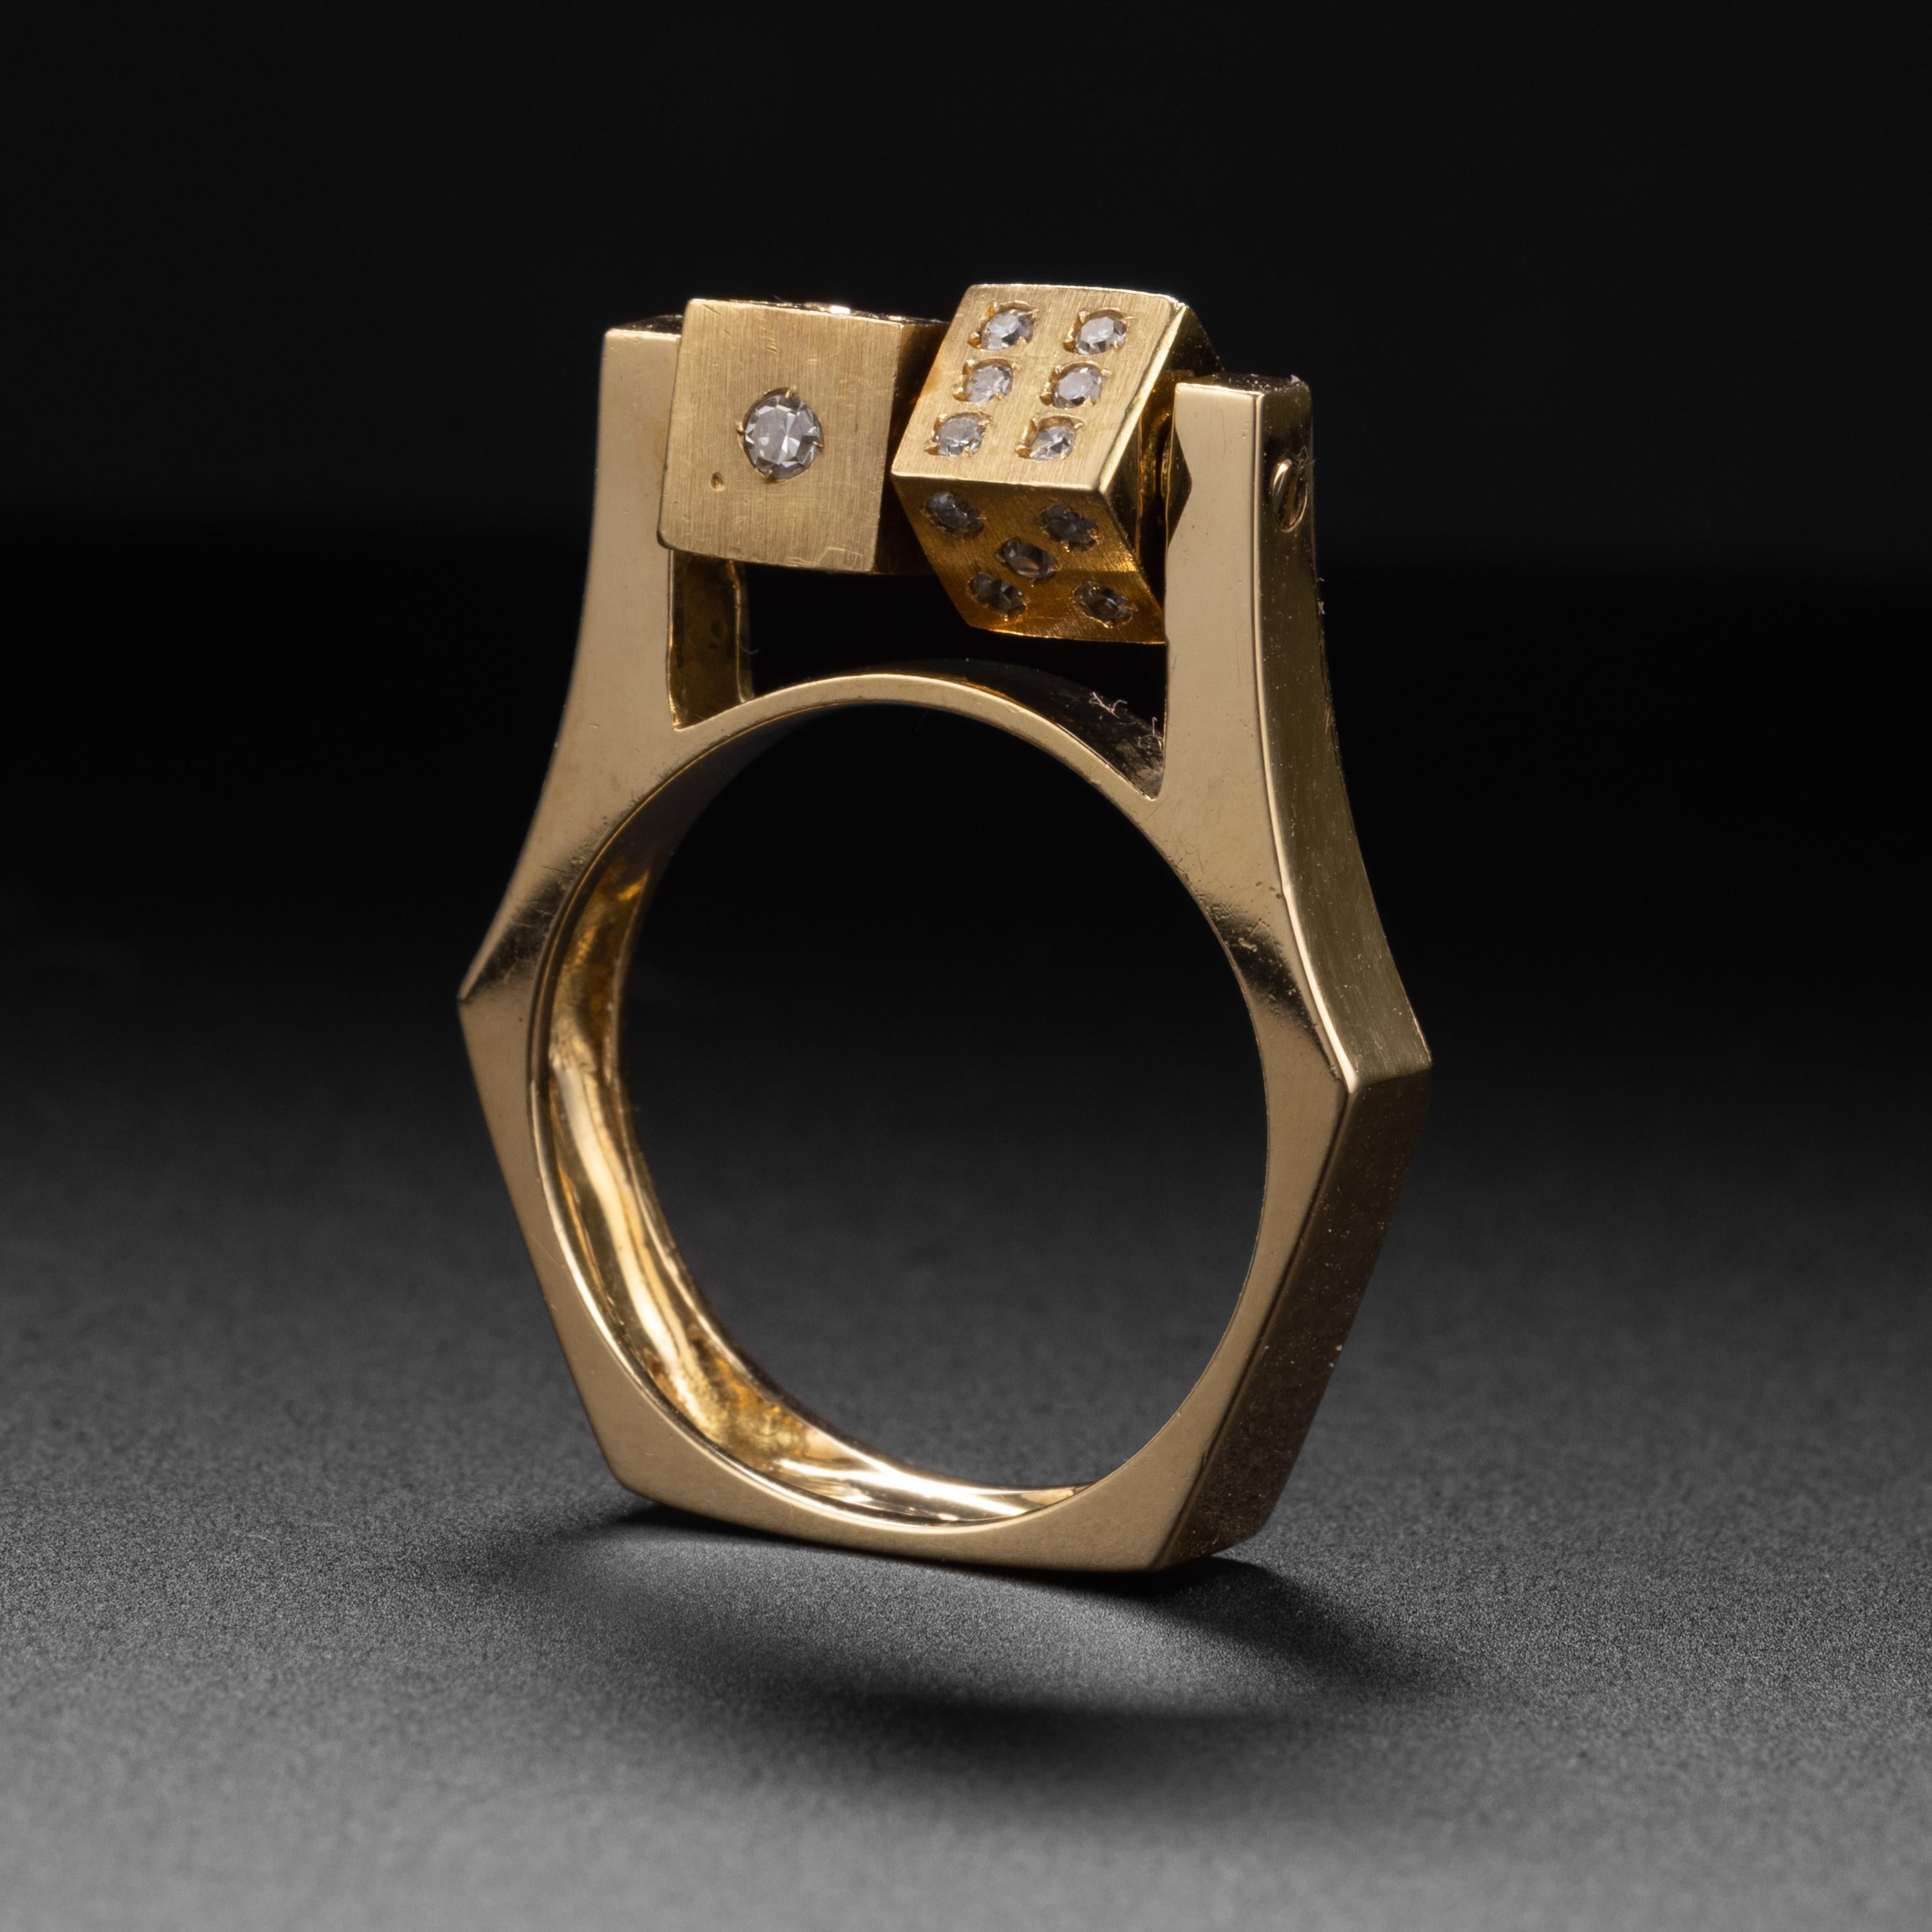 This modernist kinetic spinning dice ring is just spectacularly eccentric and unique. Everything about it is unusual: from the profile of the ring itself to the fact that it features a pair of dice that spin and instead of plain old boring black